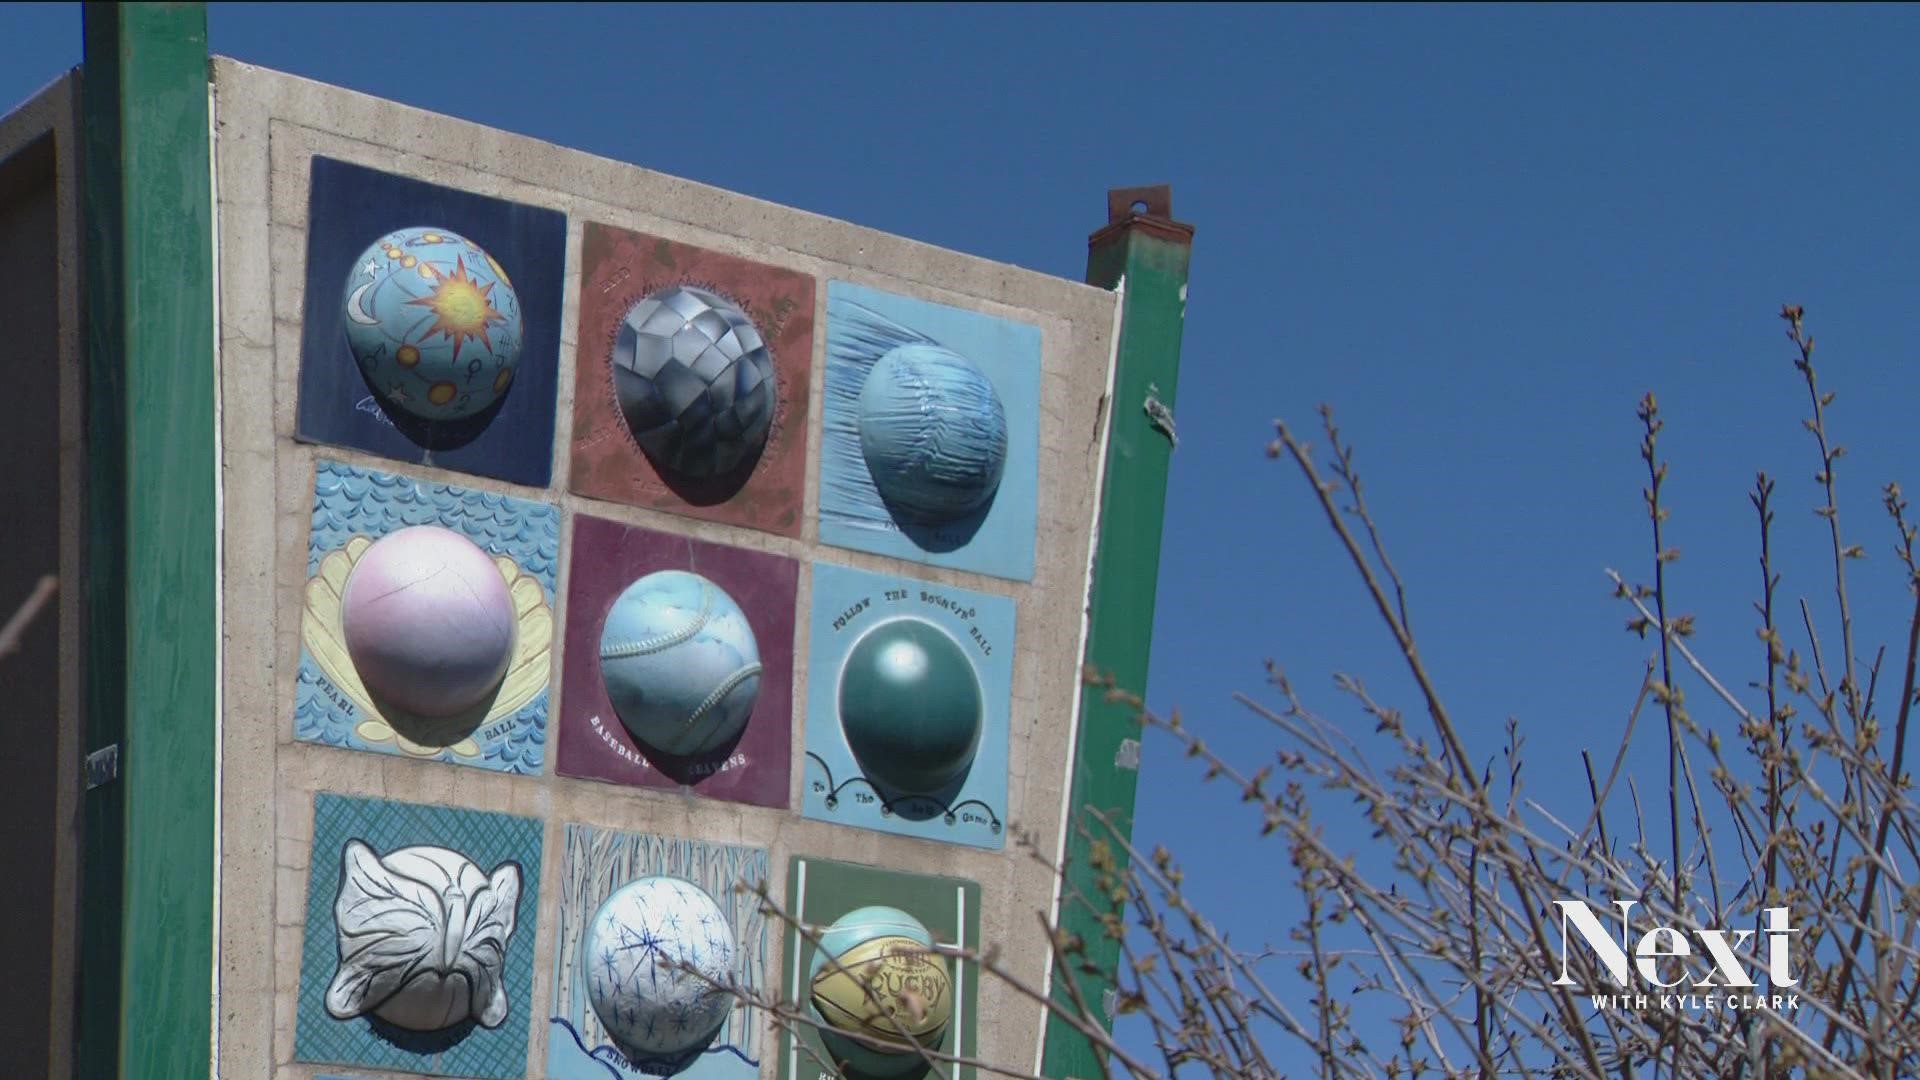 Local artist Lonnie Hanzon, who designed the sculpture outside Coors Field 25 years ago, was concerned when plans for McGregor Square didn't include his artwork.